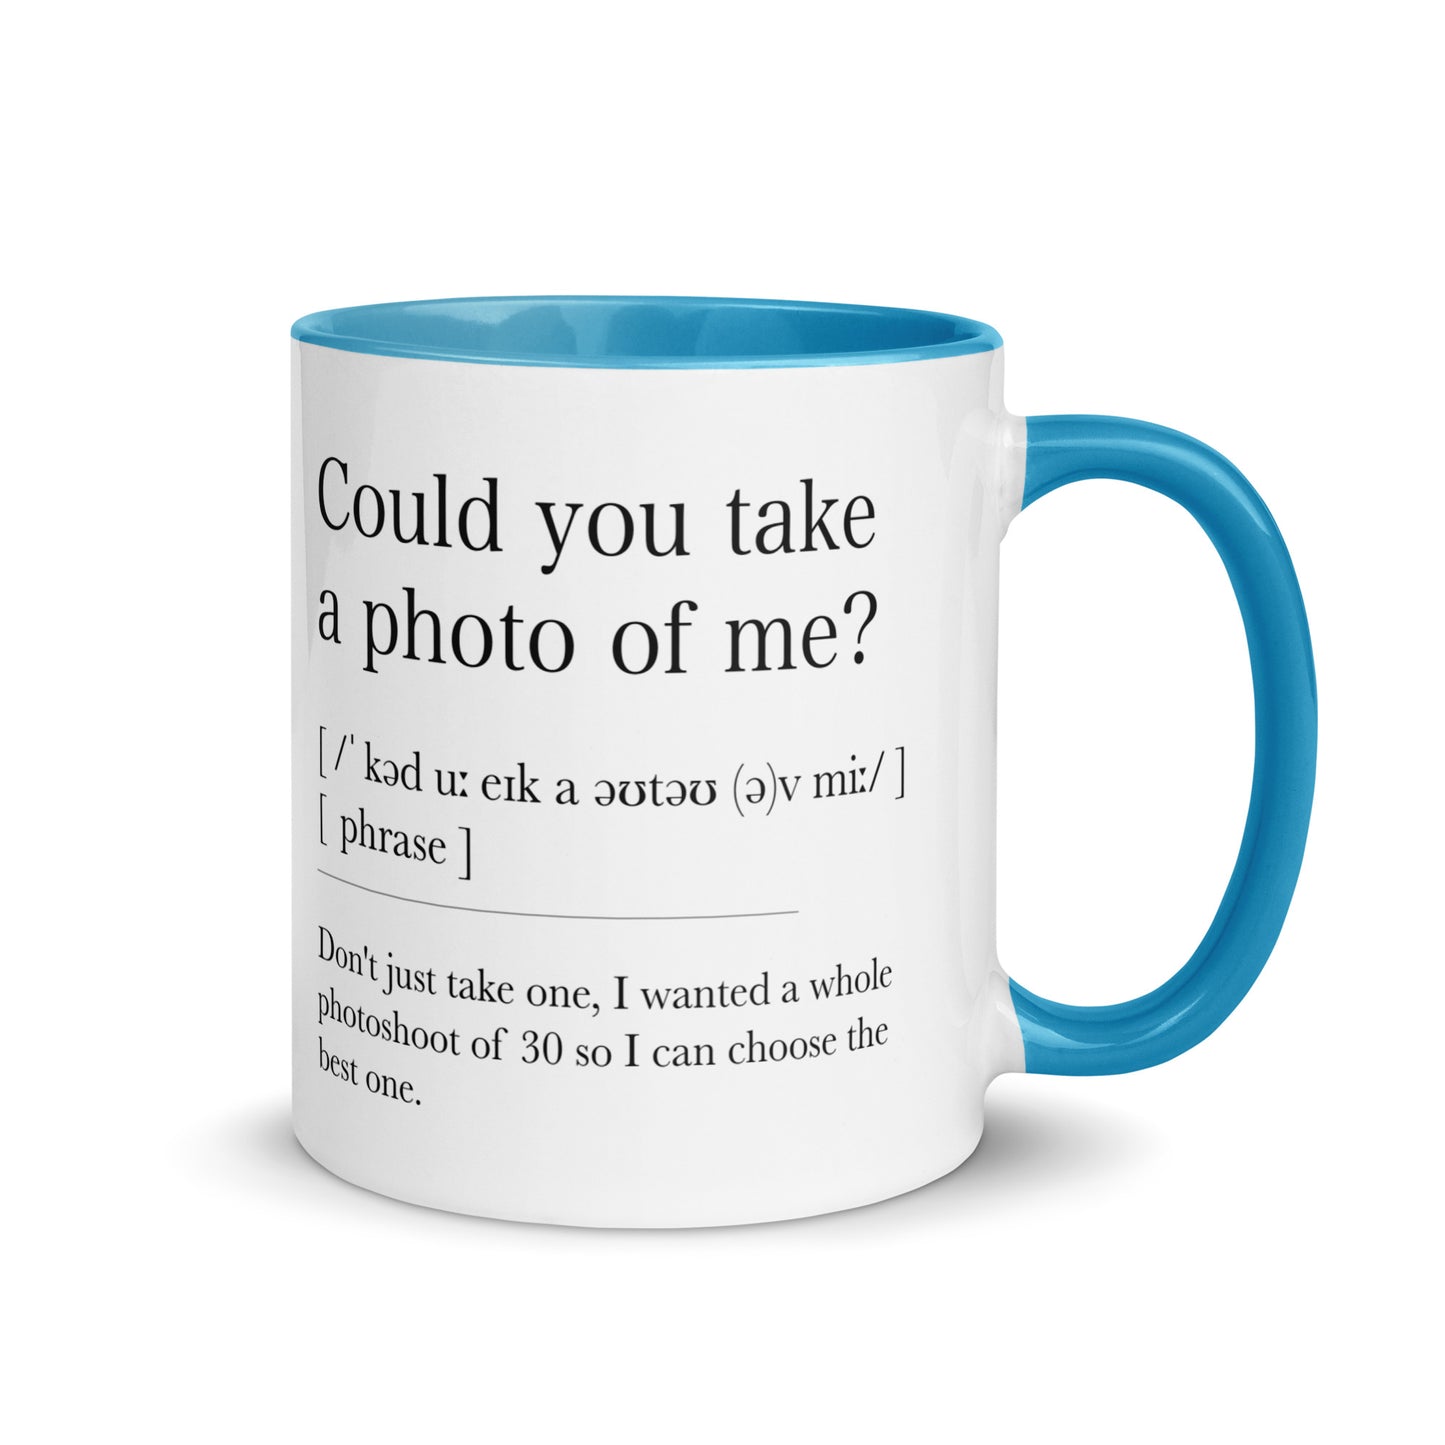 Could you take a photo of me Definition Mug